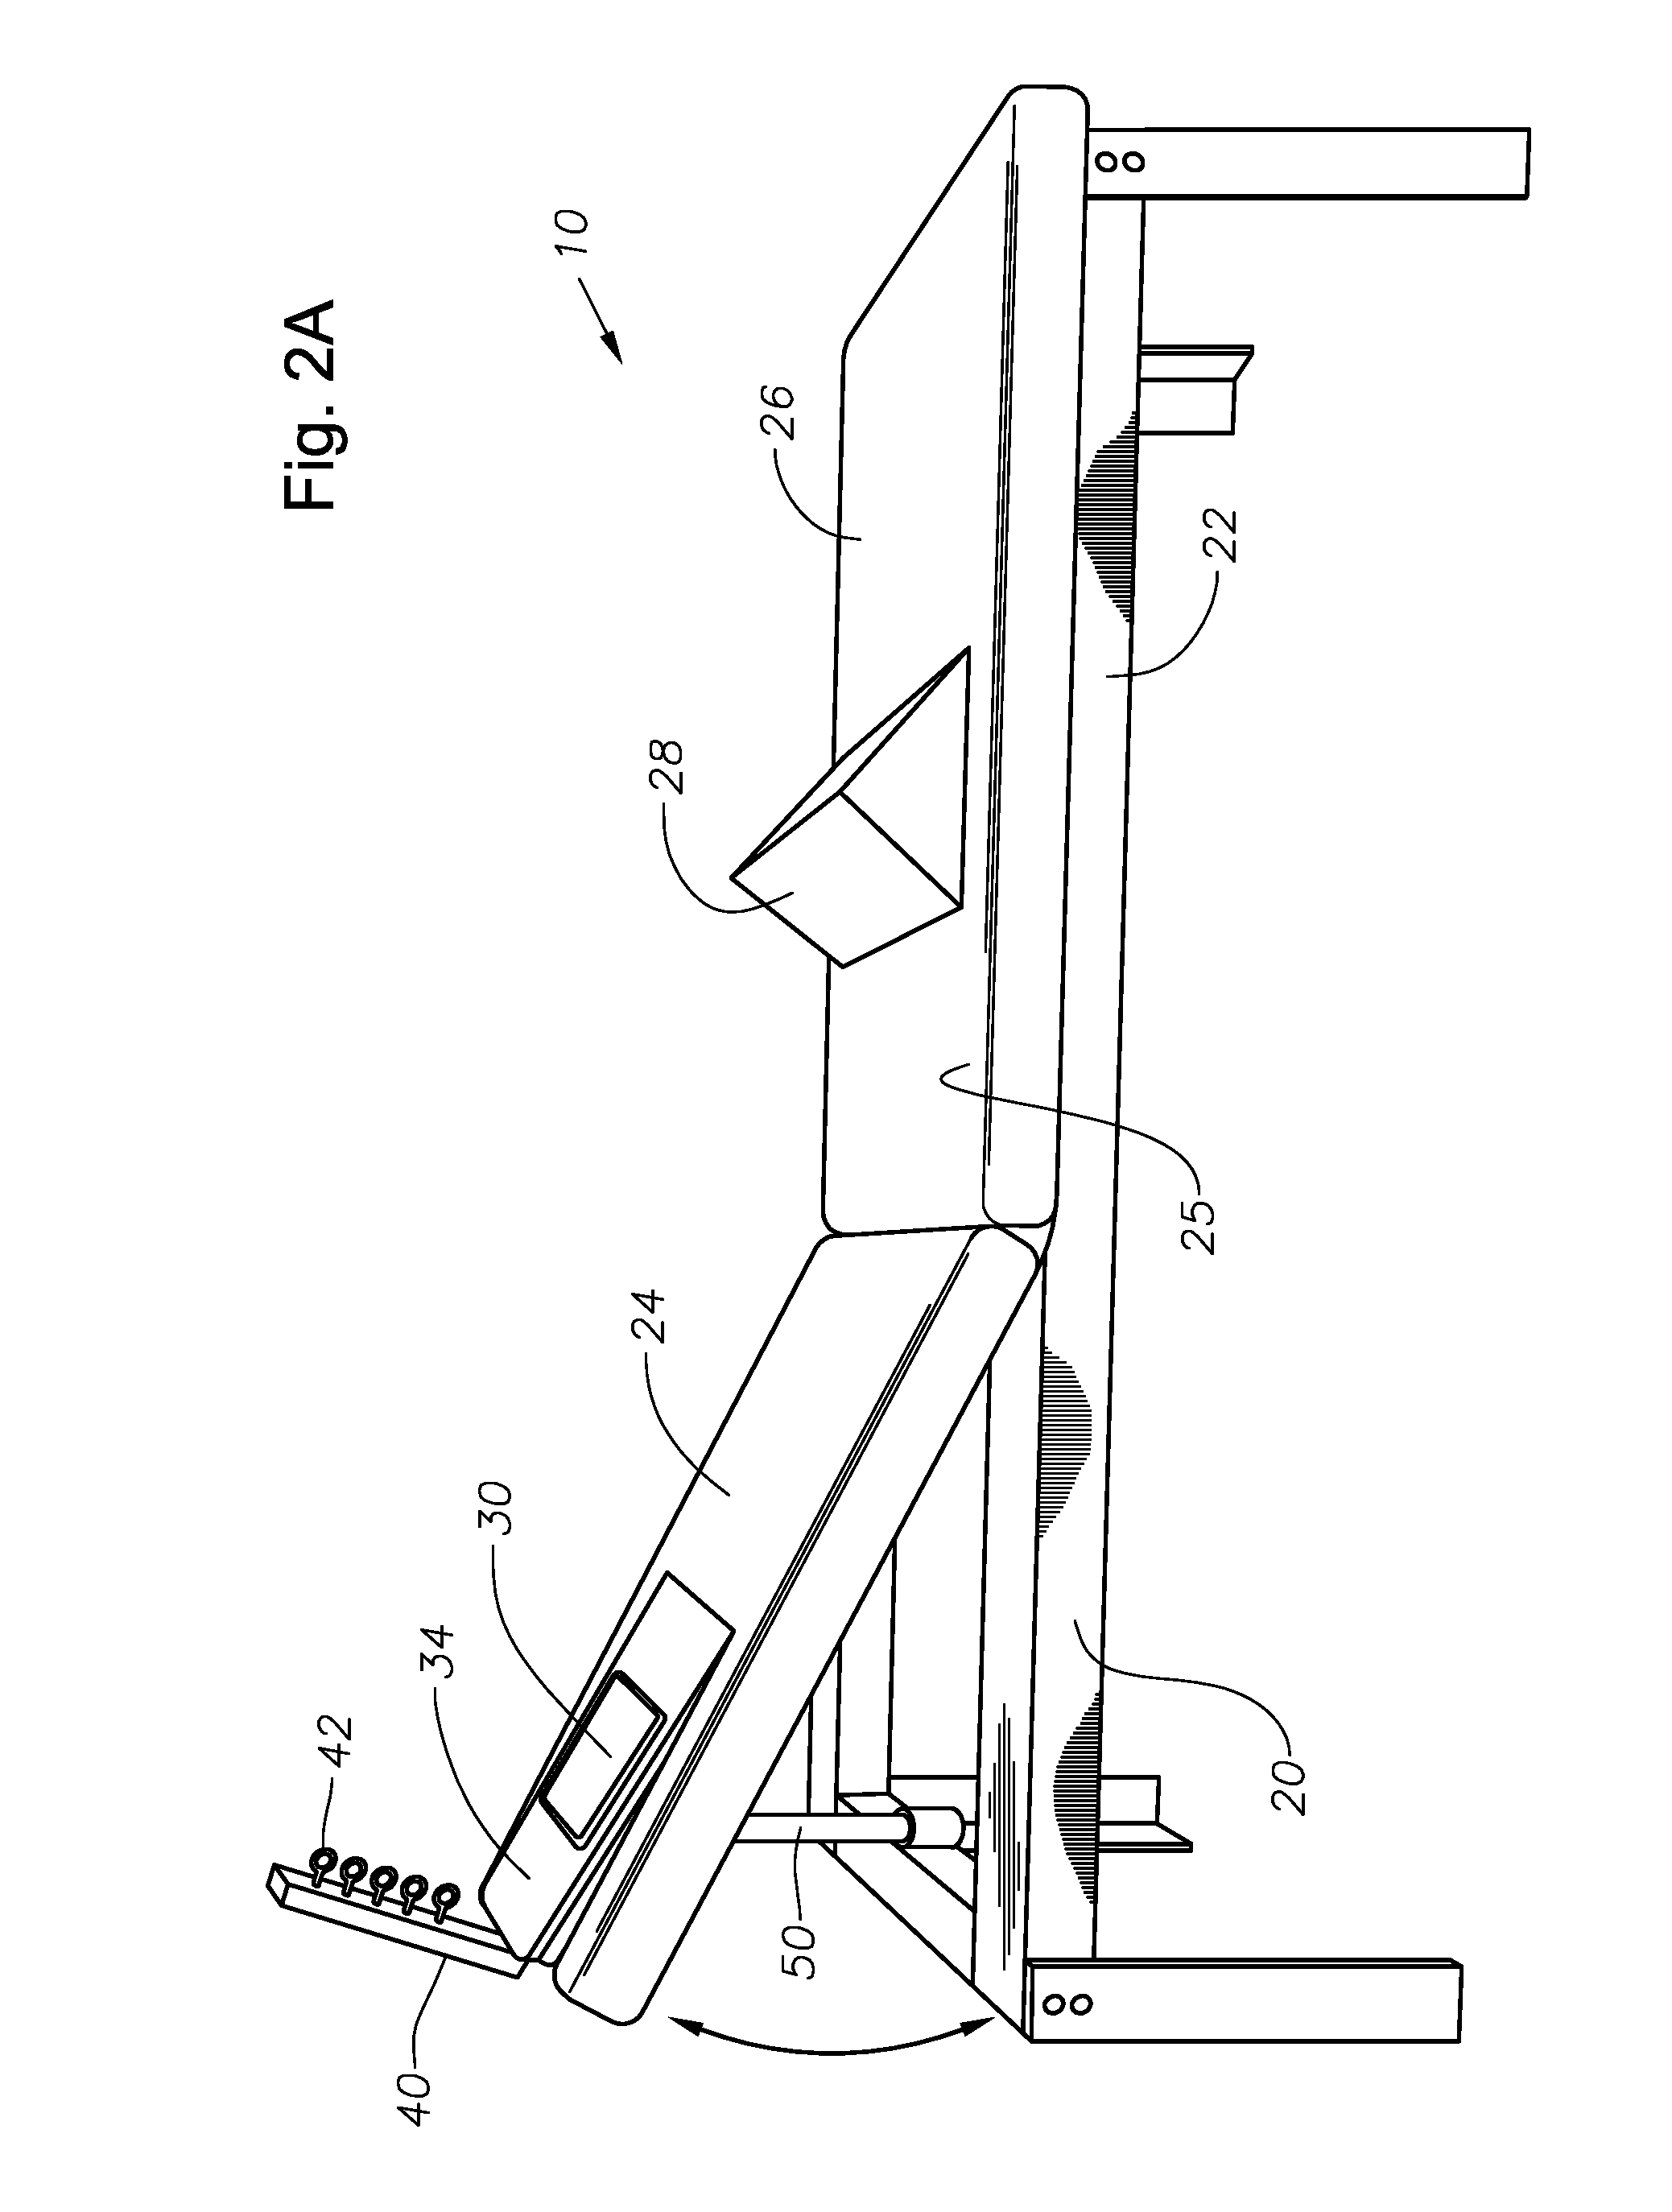 Machine and Method for Head, Neck and, Shoulder Stretching